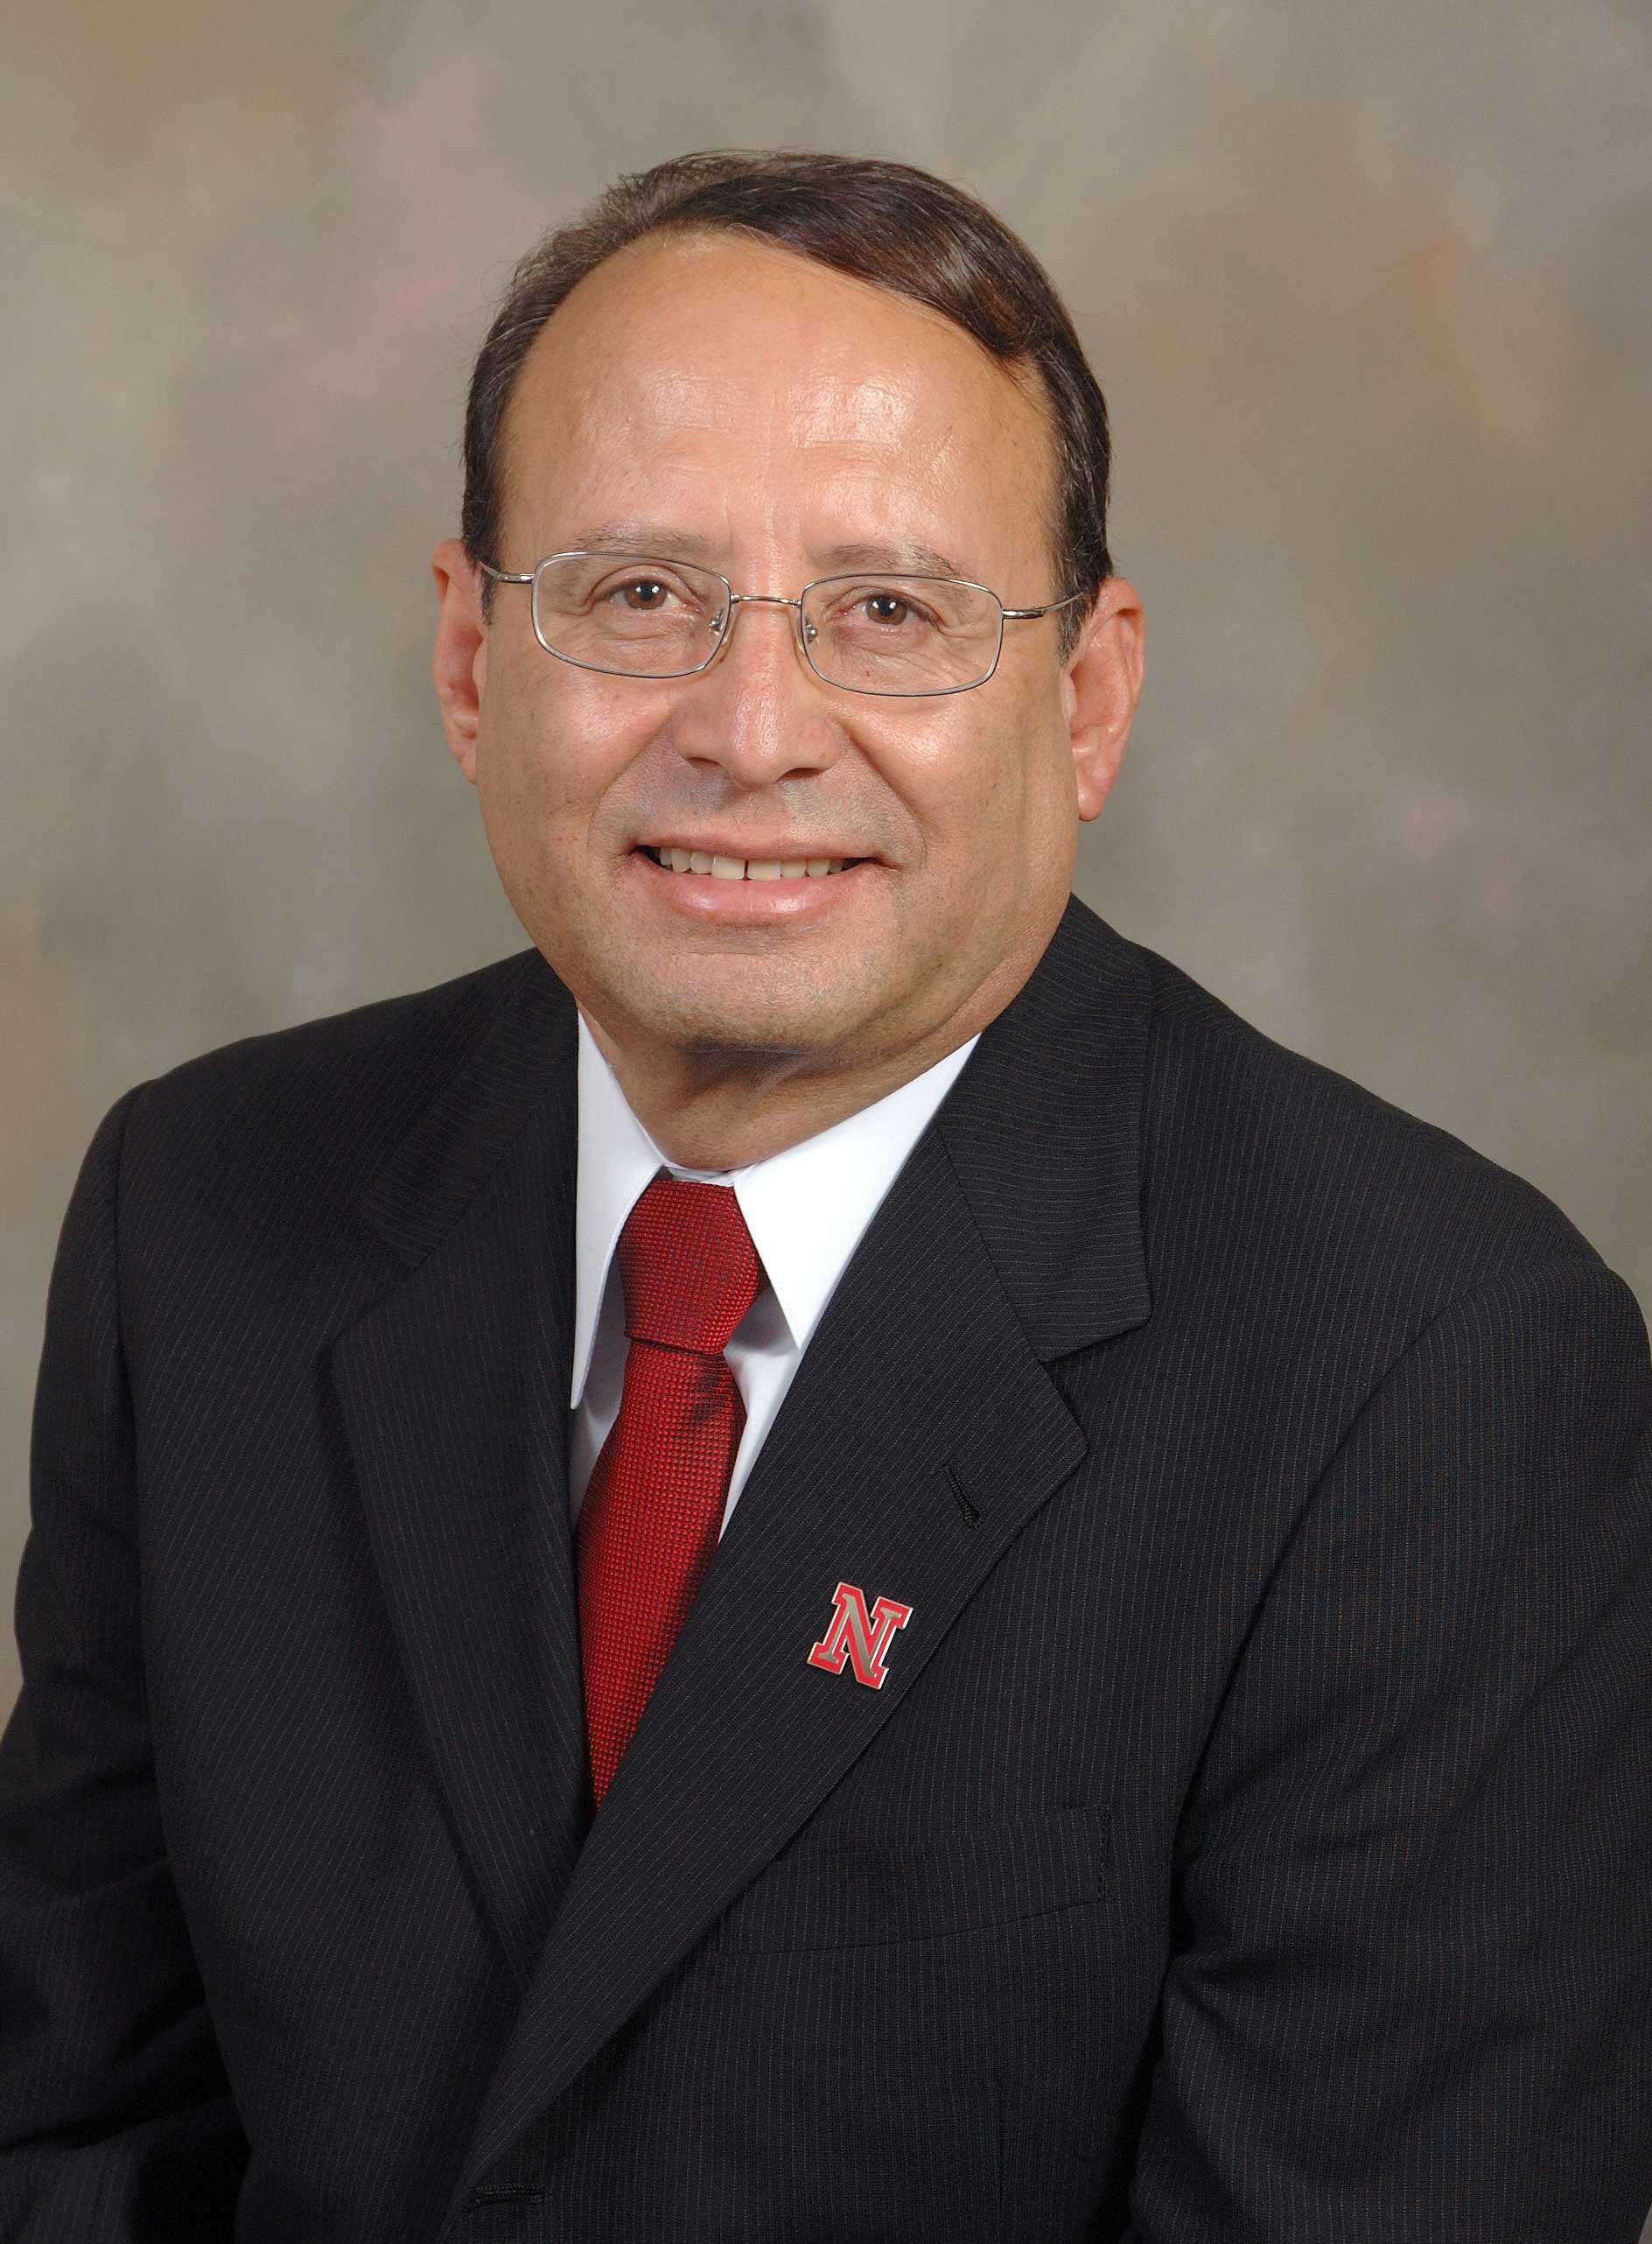 Dr. Juan N. Franco, Vice Chancellor for Student Affairs